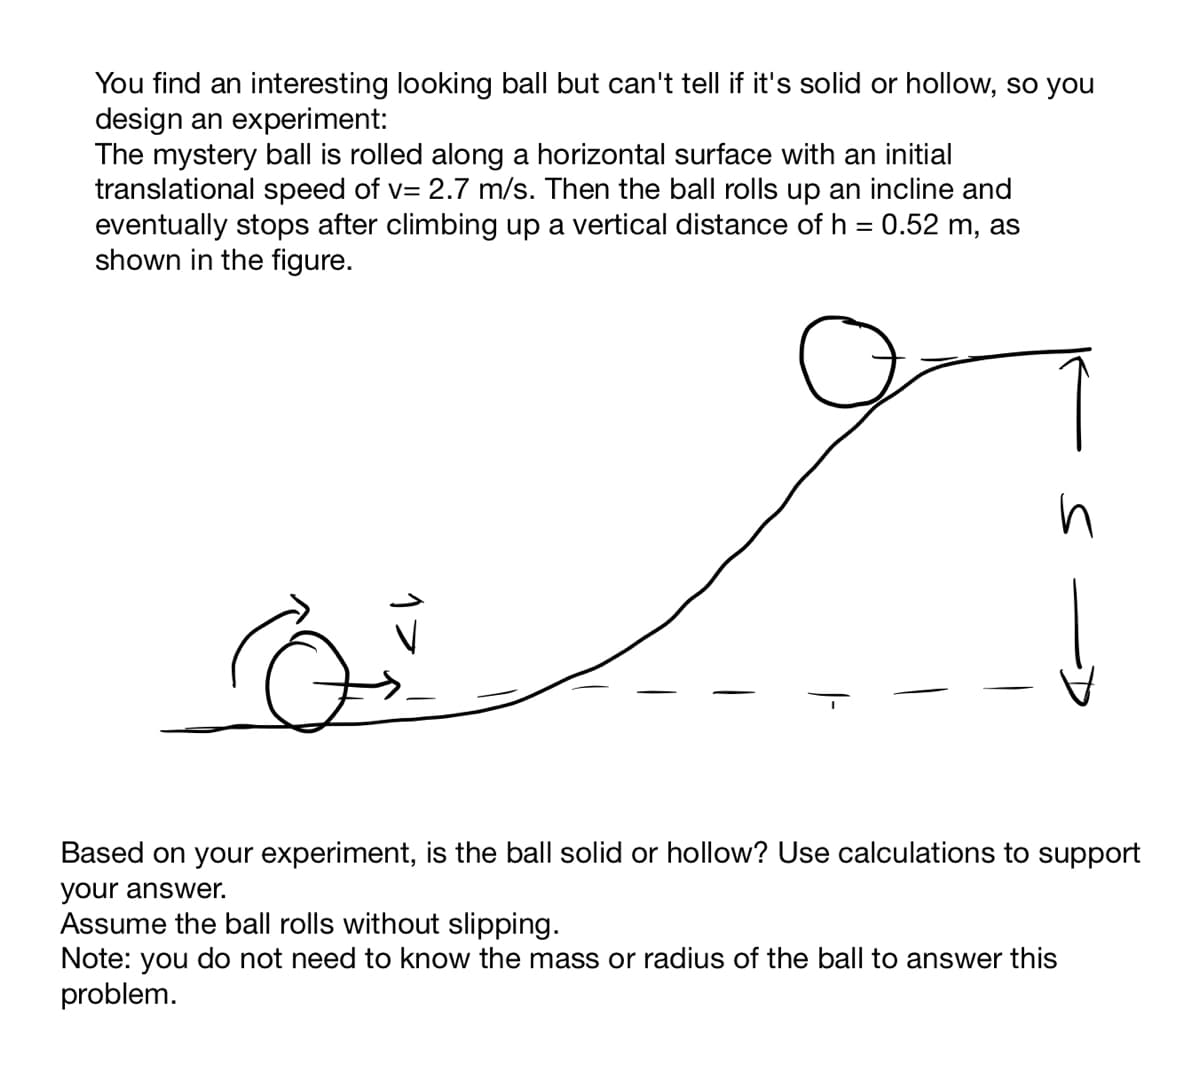 You find an interesting looking ball but can't tell if it's solid or hollow, so you
design an experiment:
The mystery ball is rolled along a horizontal surface with an initial
translational speed of v= 2.7 m/s. Then the ball rolls up an incline and
eventually stops after climbing up a vertical distance of h = 0.52 m, as
shown in the figure.
Based on your experiment, is the ball solid or hollow? Use calculations to support
your answer.
Assume the ball rolls without slipping.
Note: you do not need to know the mass or radius of the ball to answer this
problem.
1フ
